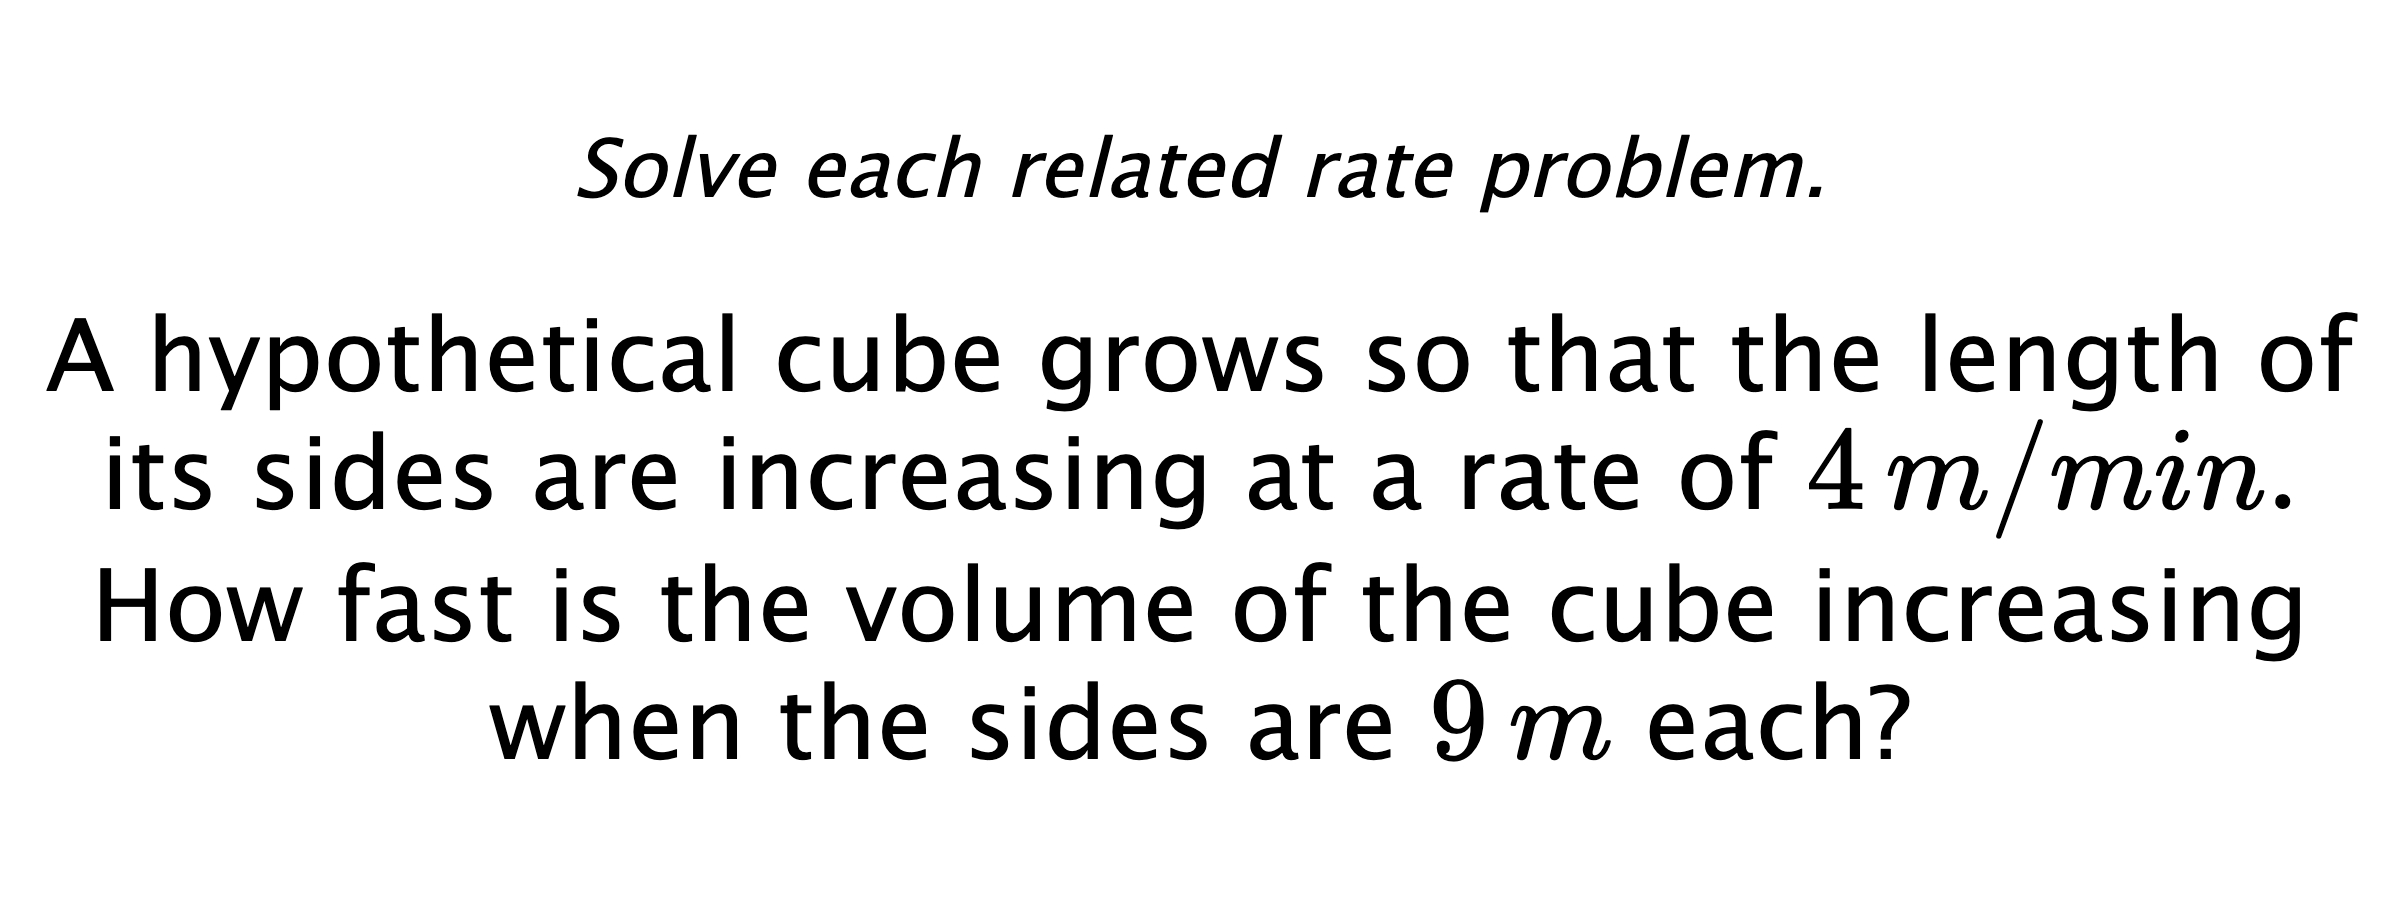 Solve each related rate problem. A hypothetical cube grows so that the length of its sides are increasing at a rate of $4\,m/min.$ How fast is the volume of the cube increasing when the sides are $9\,m$ each?